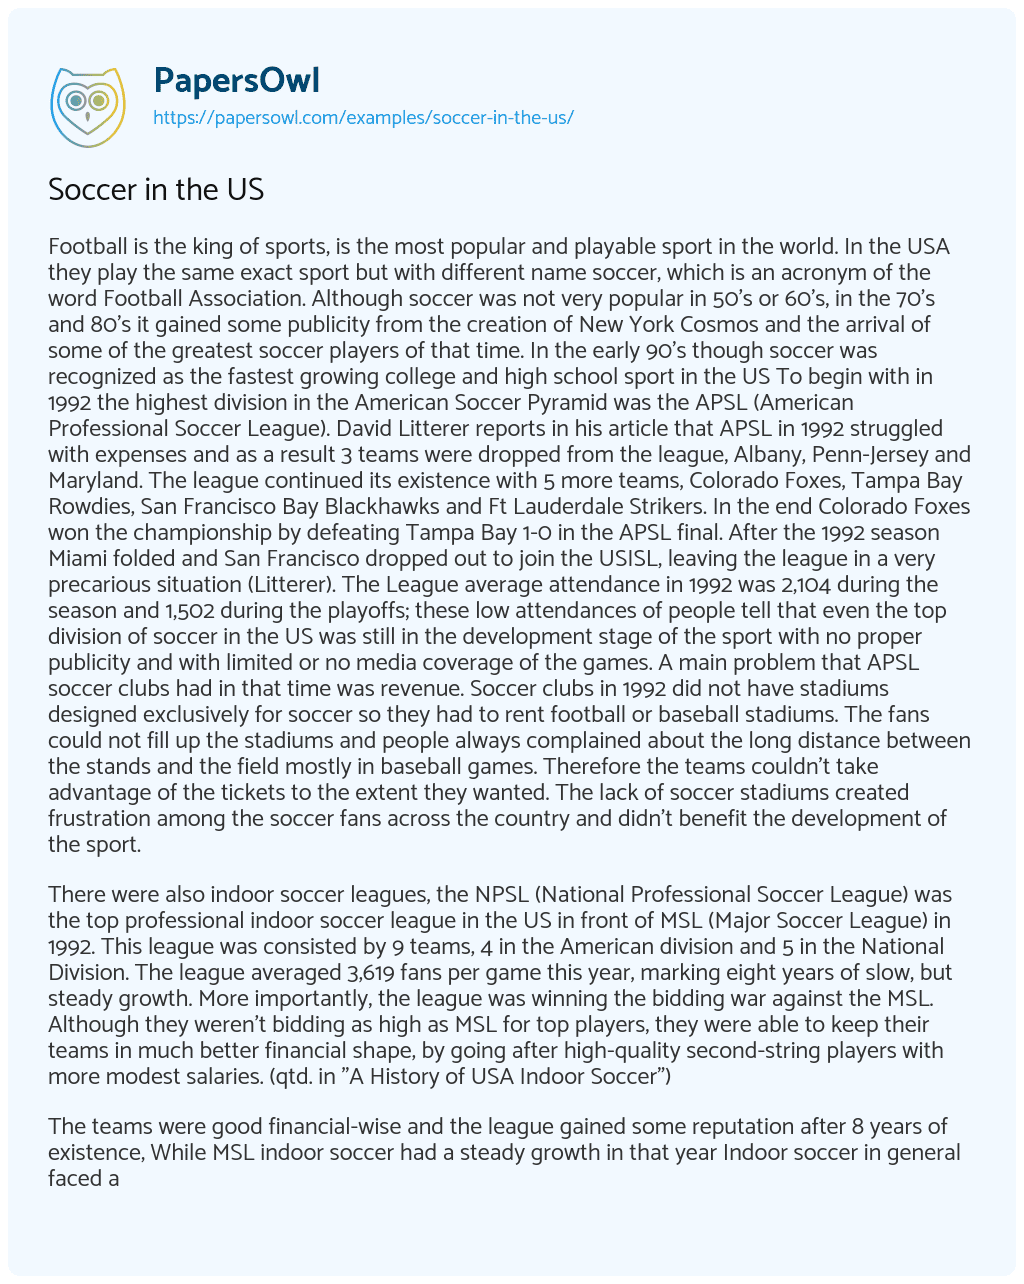 Essay on Soccer in the US